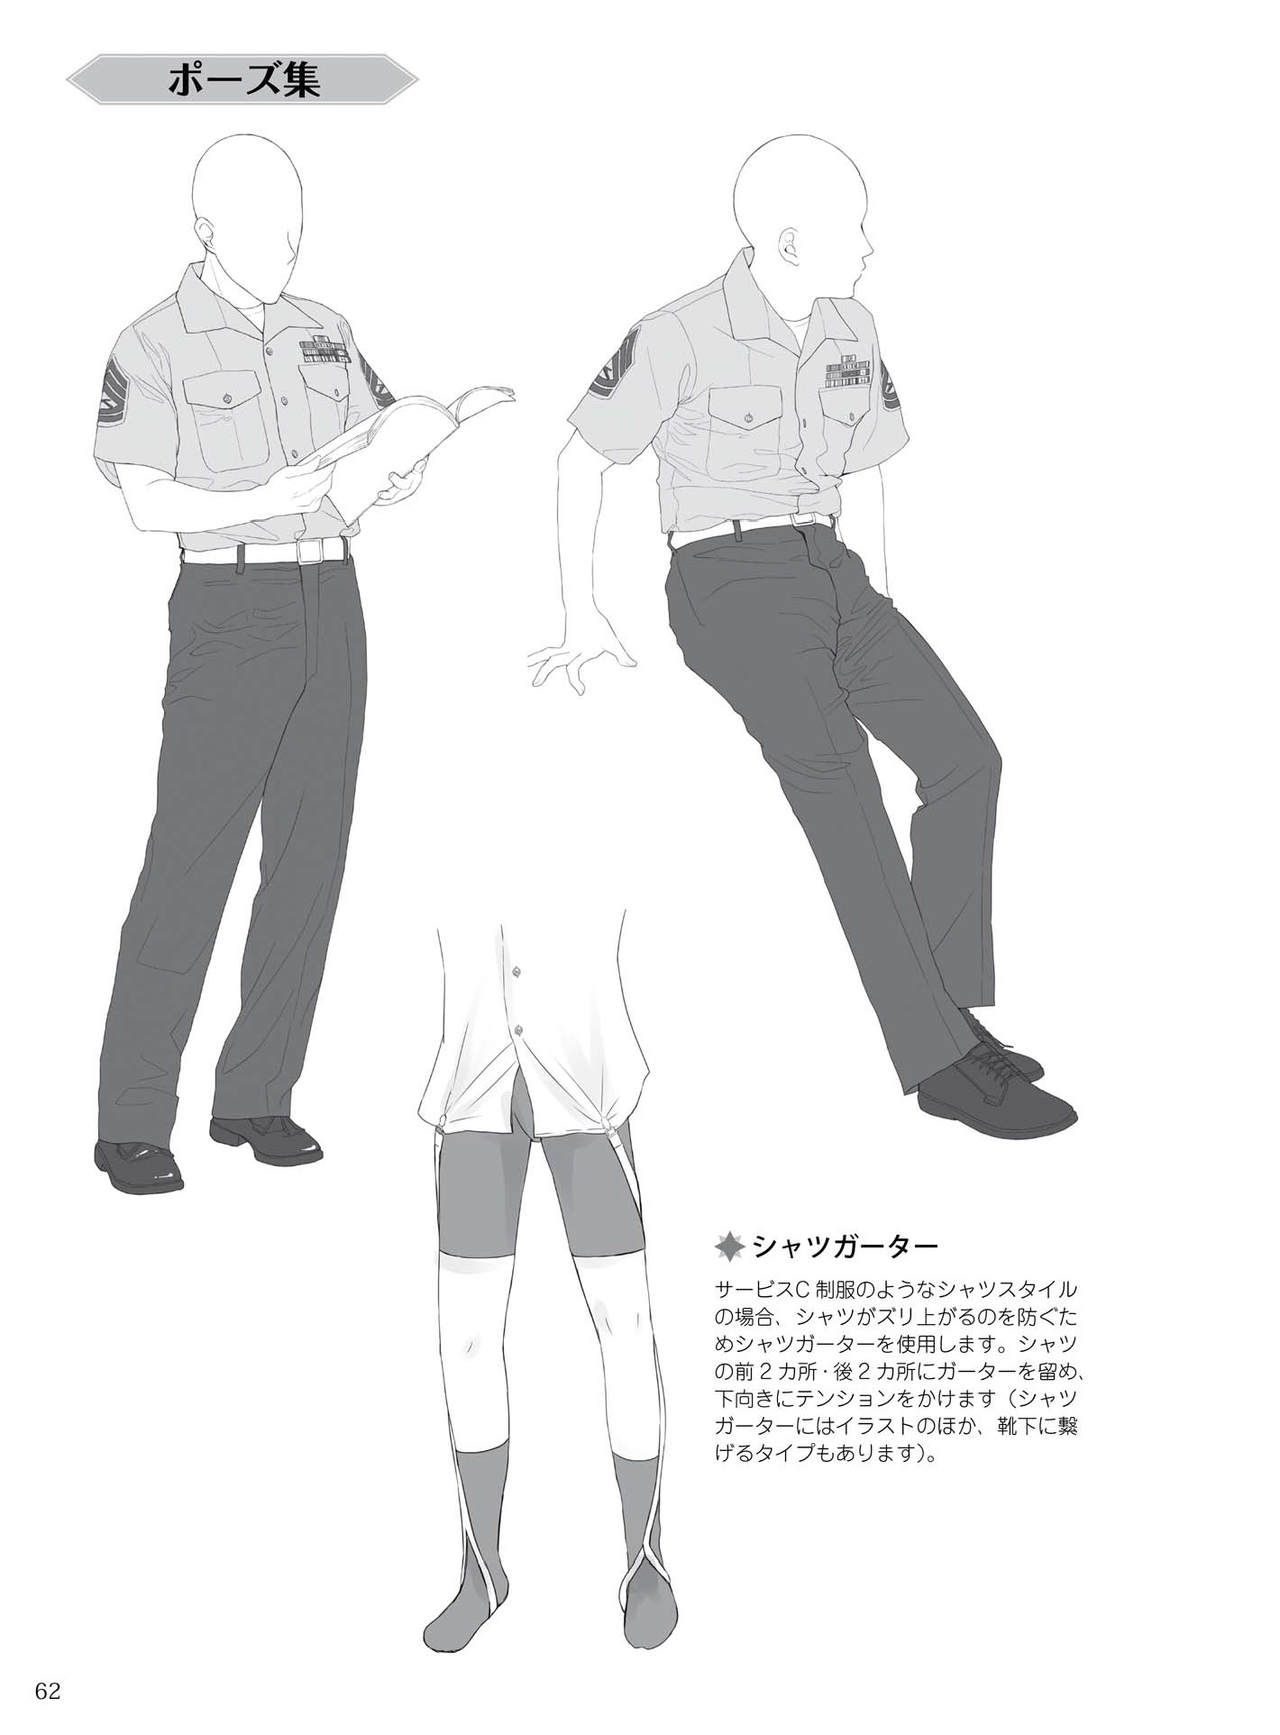 How to draw military uniforms and uniforms From Self-Defense Forces 軍服・制服の描き方 アメリカ軍・自衛隊の制服から戦闘服まで 65